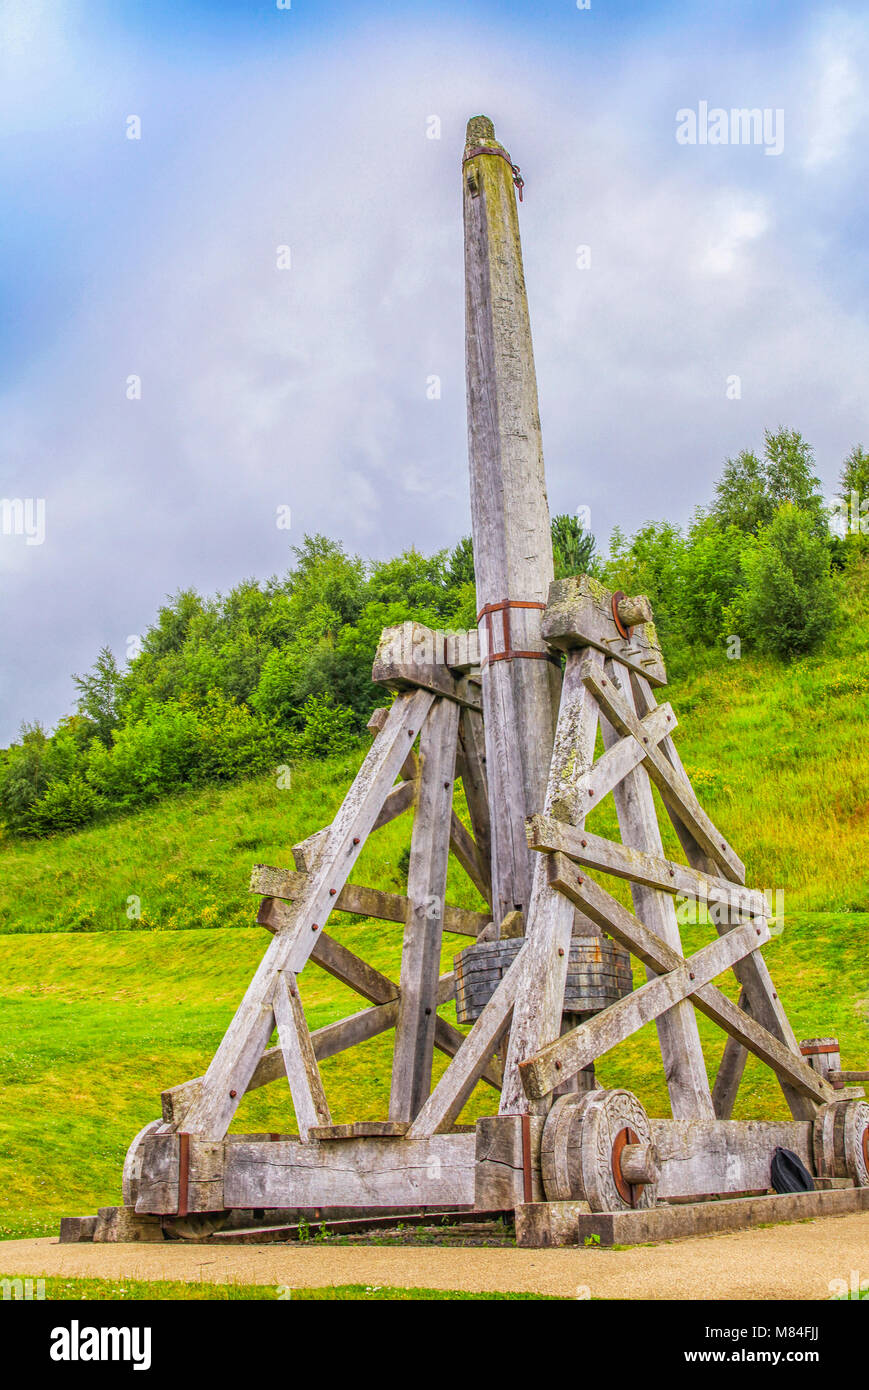 Replica of a medieval wooden catapult in Scotland Stock Photo